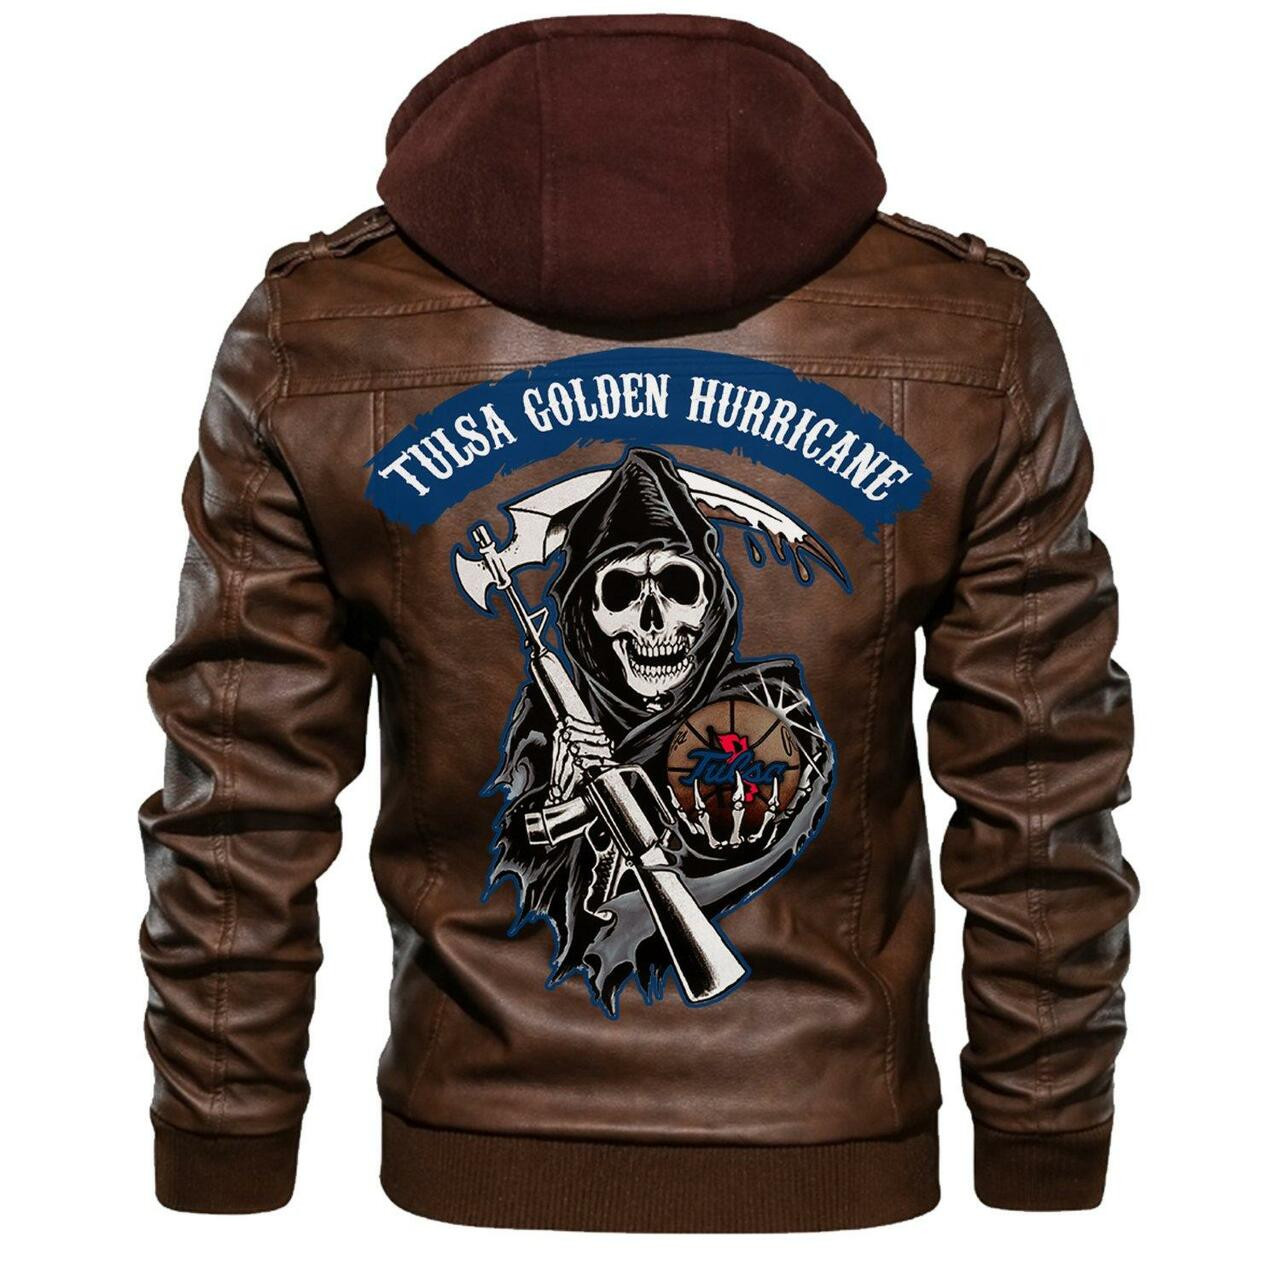 Check out and find the right leather jacket below 161